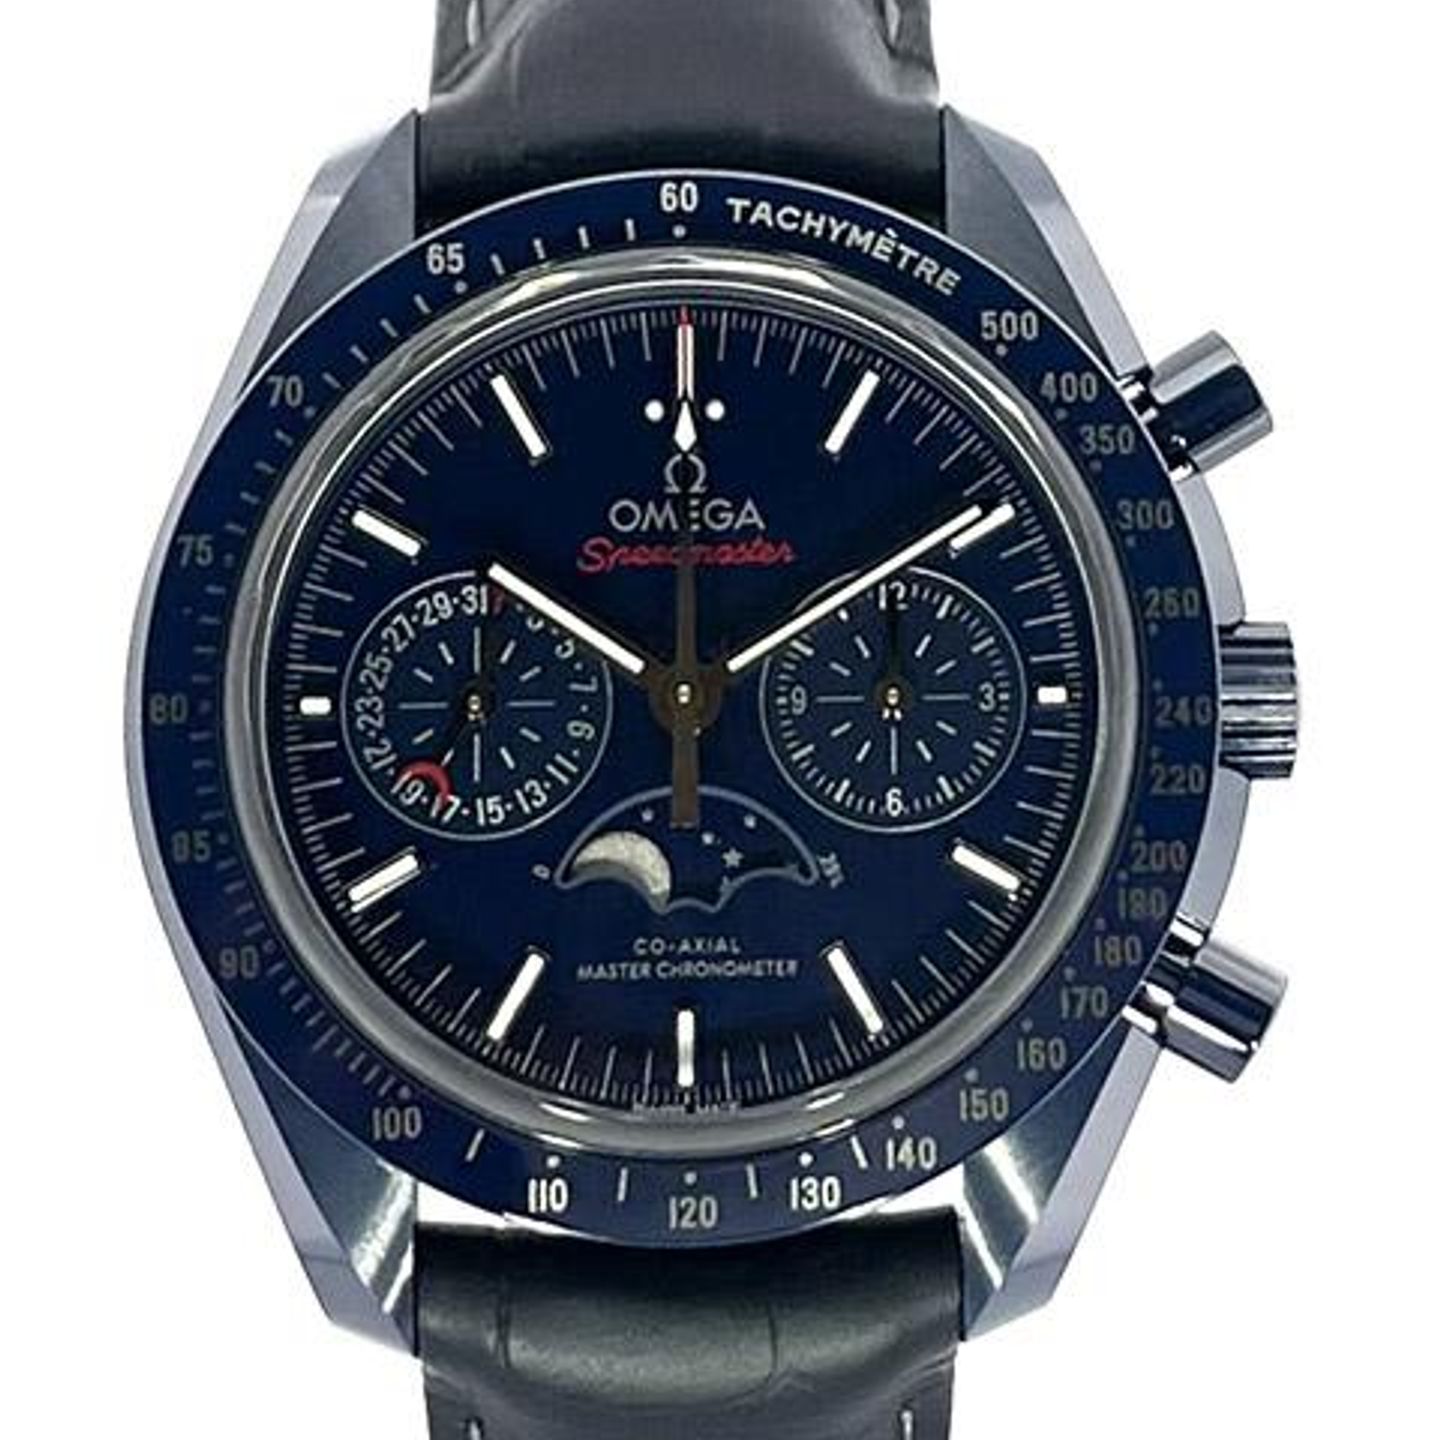 Omega Speedmaster Professional Moonwatch Moonphase 304.93.44.52.03.001 (2023) - Blue dial 44 mm Ceramic case (1/8)